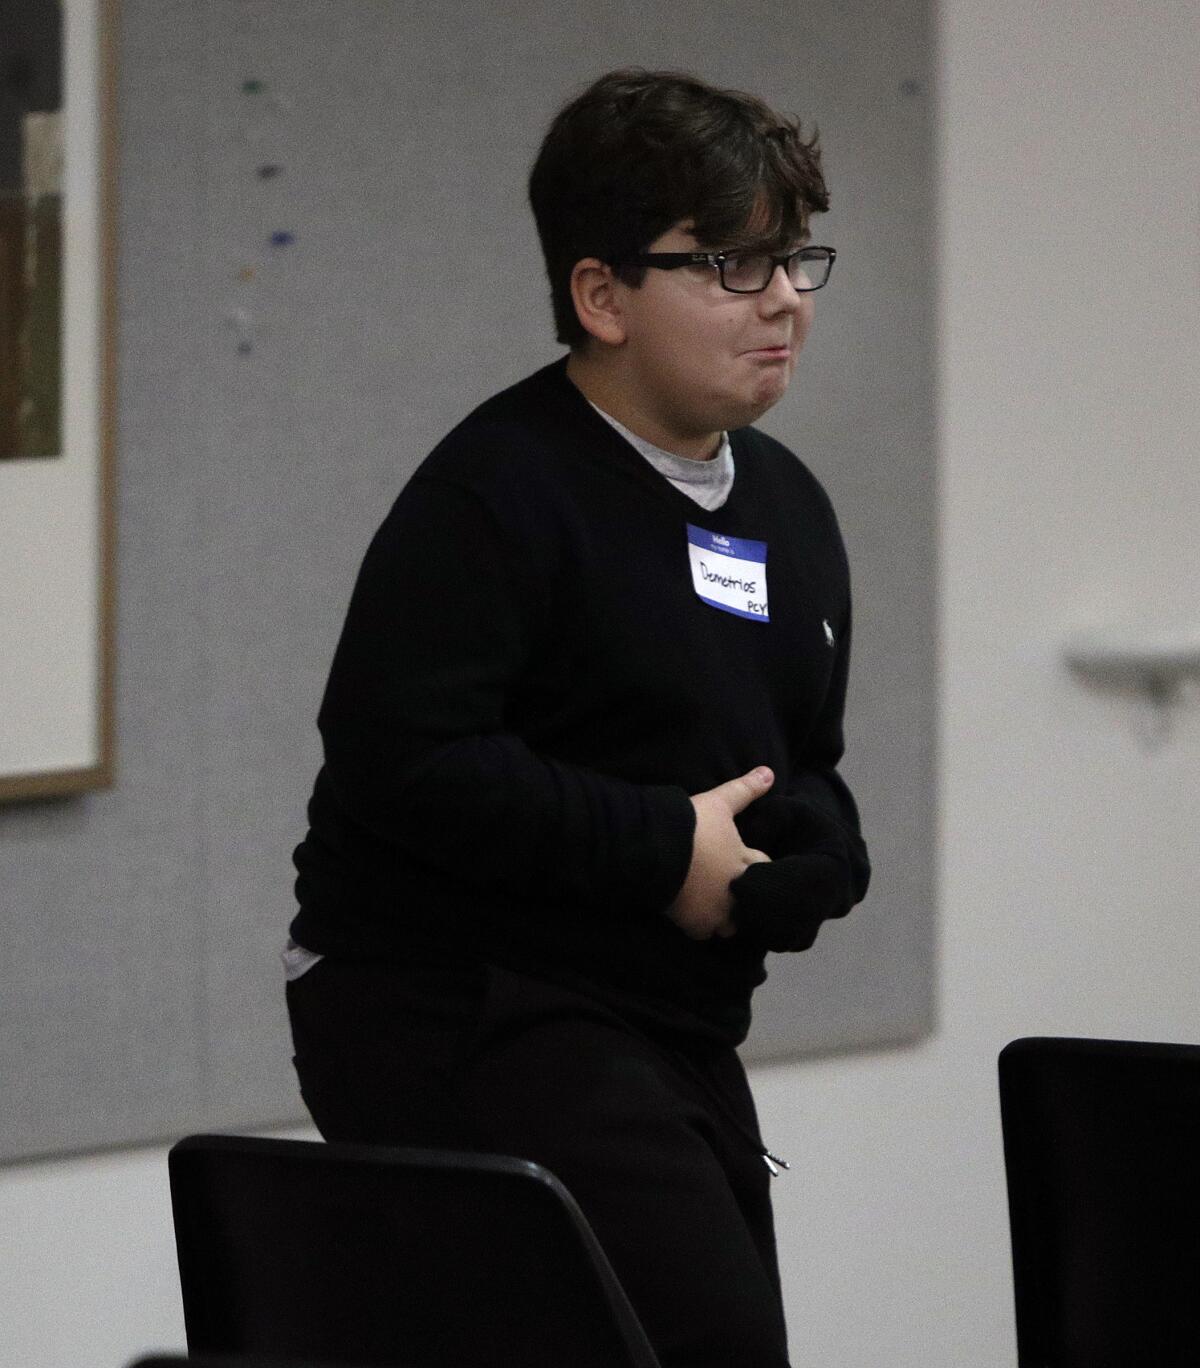 Paradise Canyon's Demetrios Pitsos looks a little stressed returning to his chair after spelling a word correctly in the LCUSD district spelling bee Monday. The fourth-grader placed second among 16 contestants.